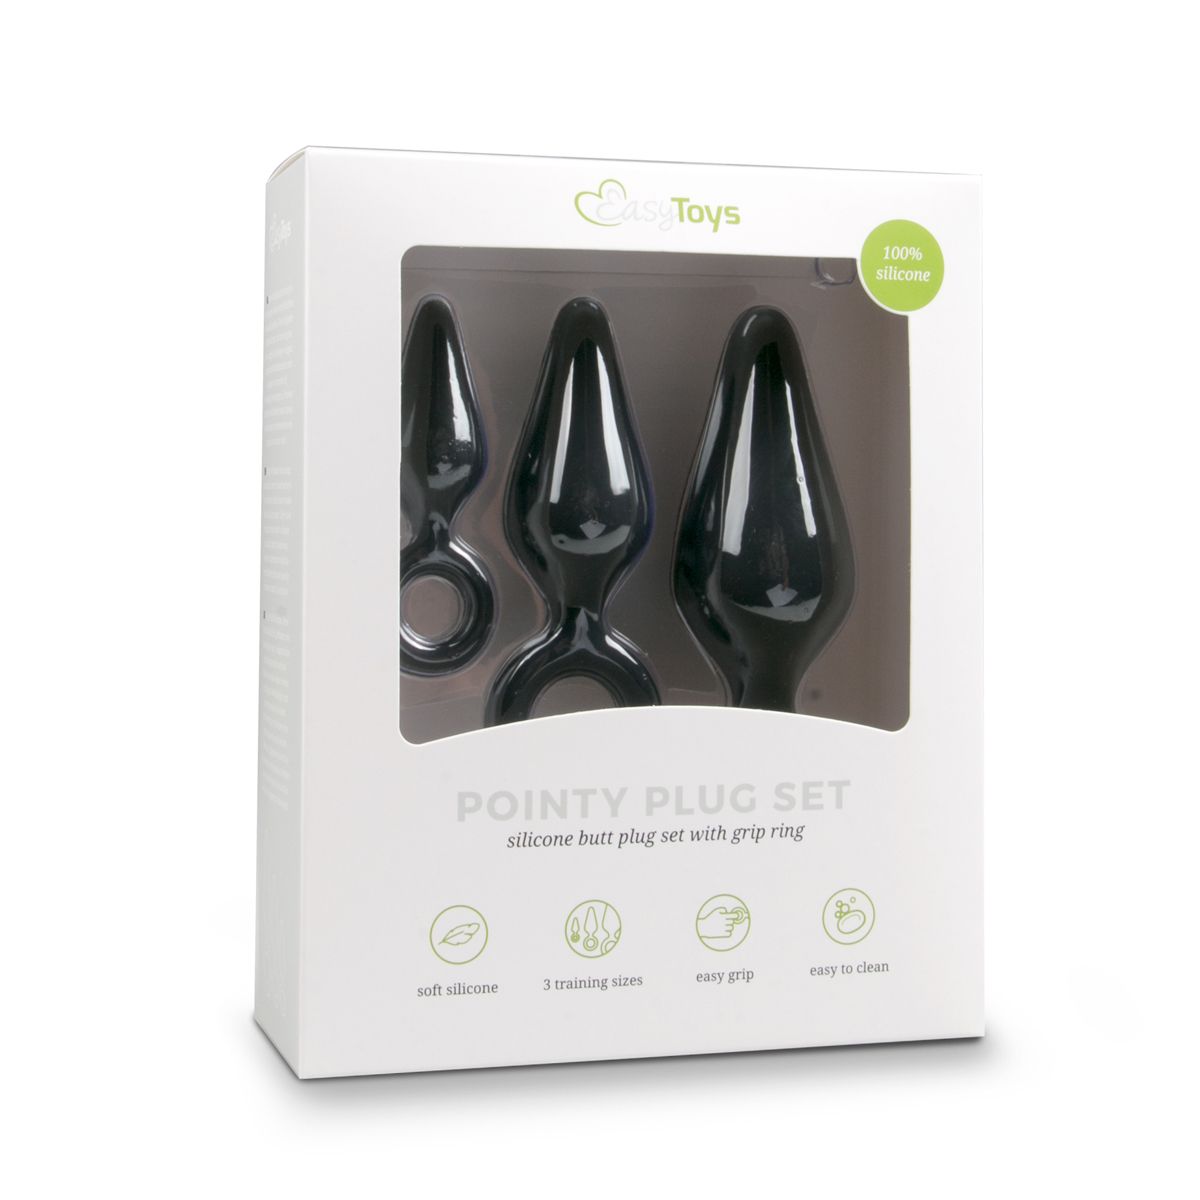 Small Silicone Penis Plug With Pull Ring - EasyToys